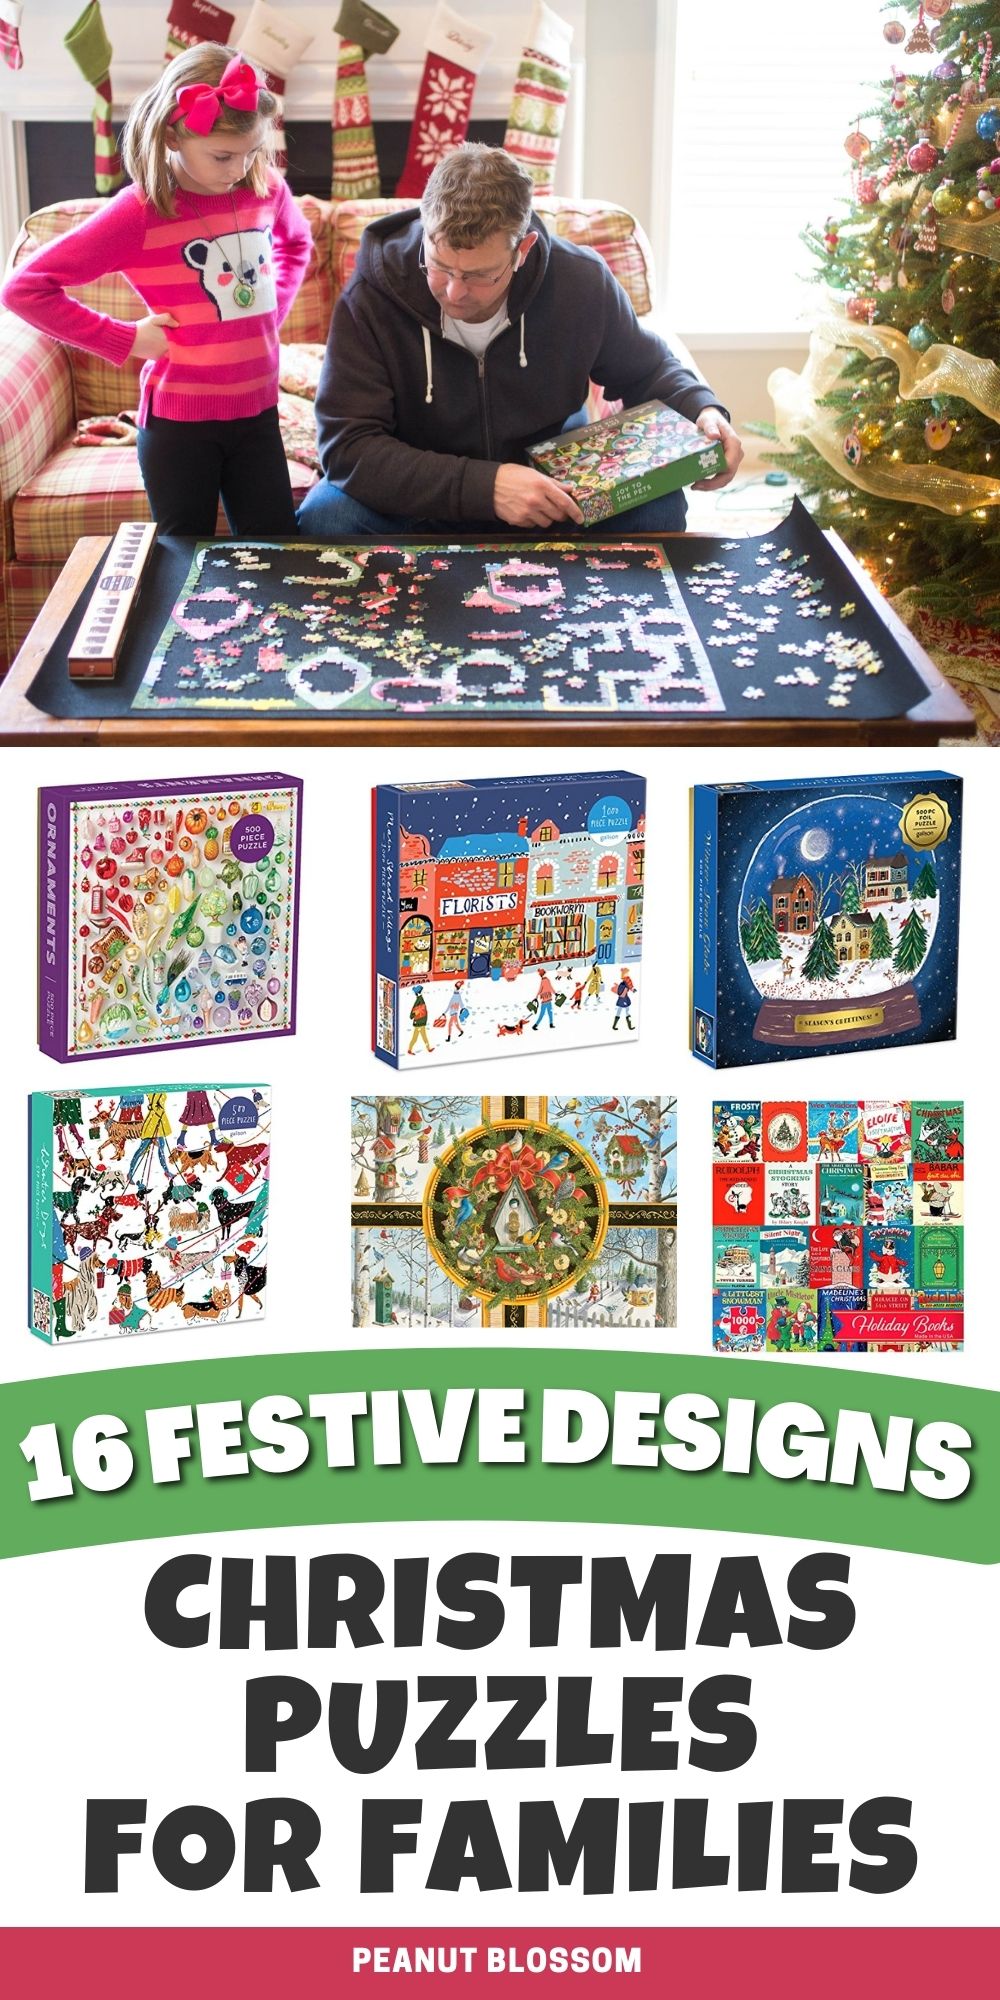 A photo collage shows several of the Christmas puzzle designs.